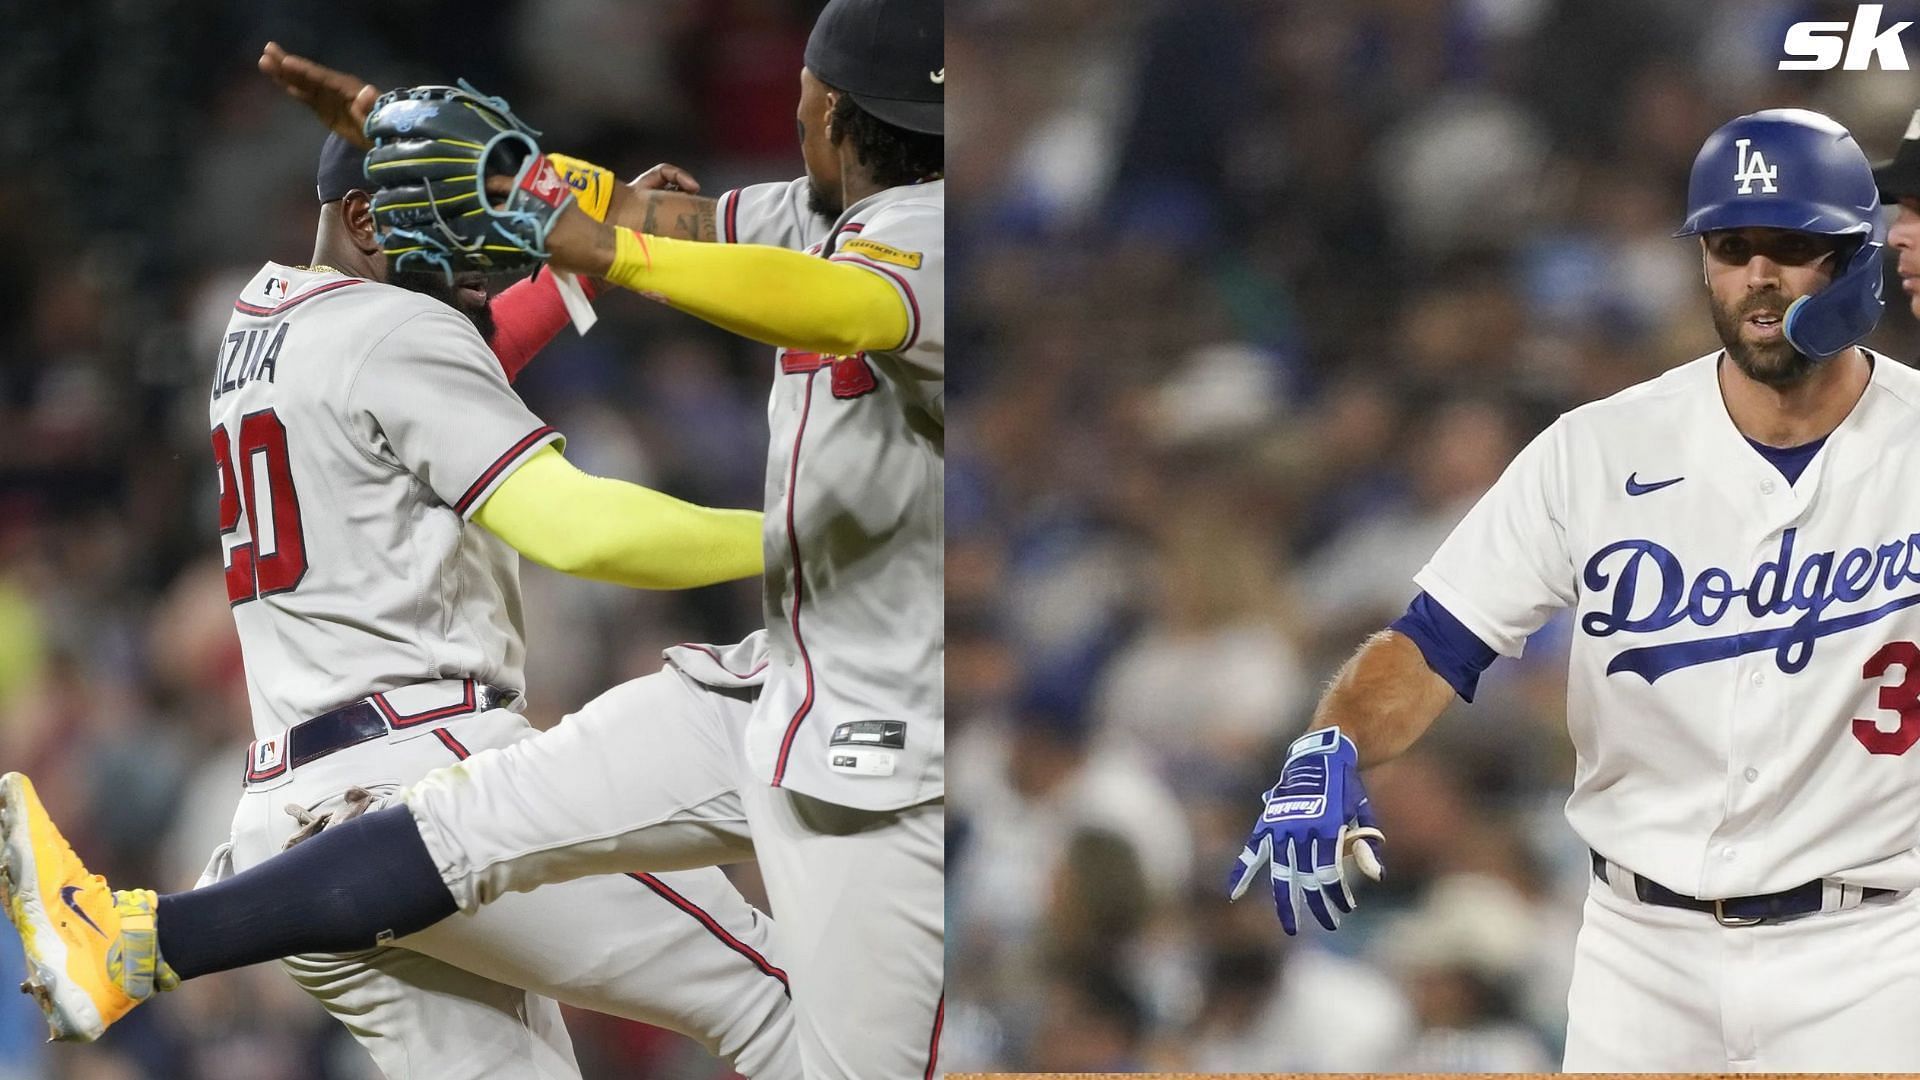 Braves beat Dodgers 8-7 in matchup between two best teams in